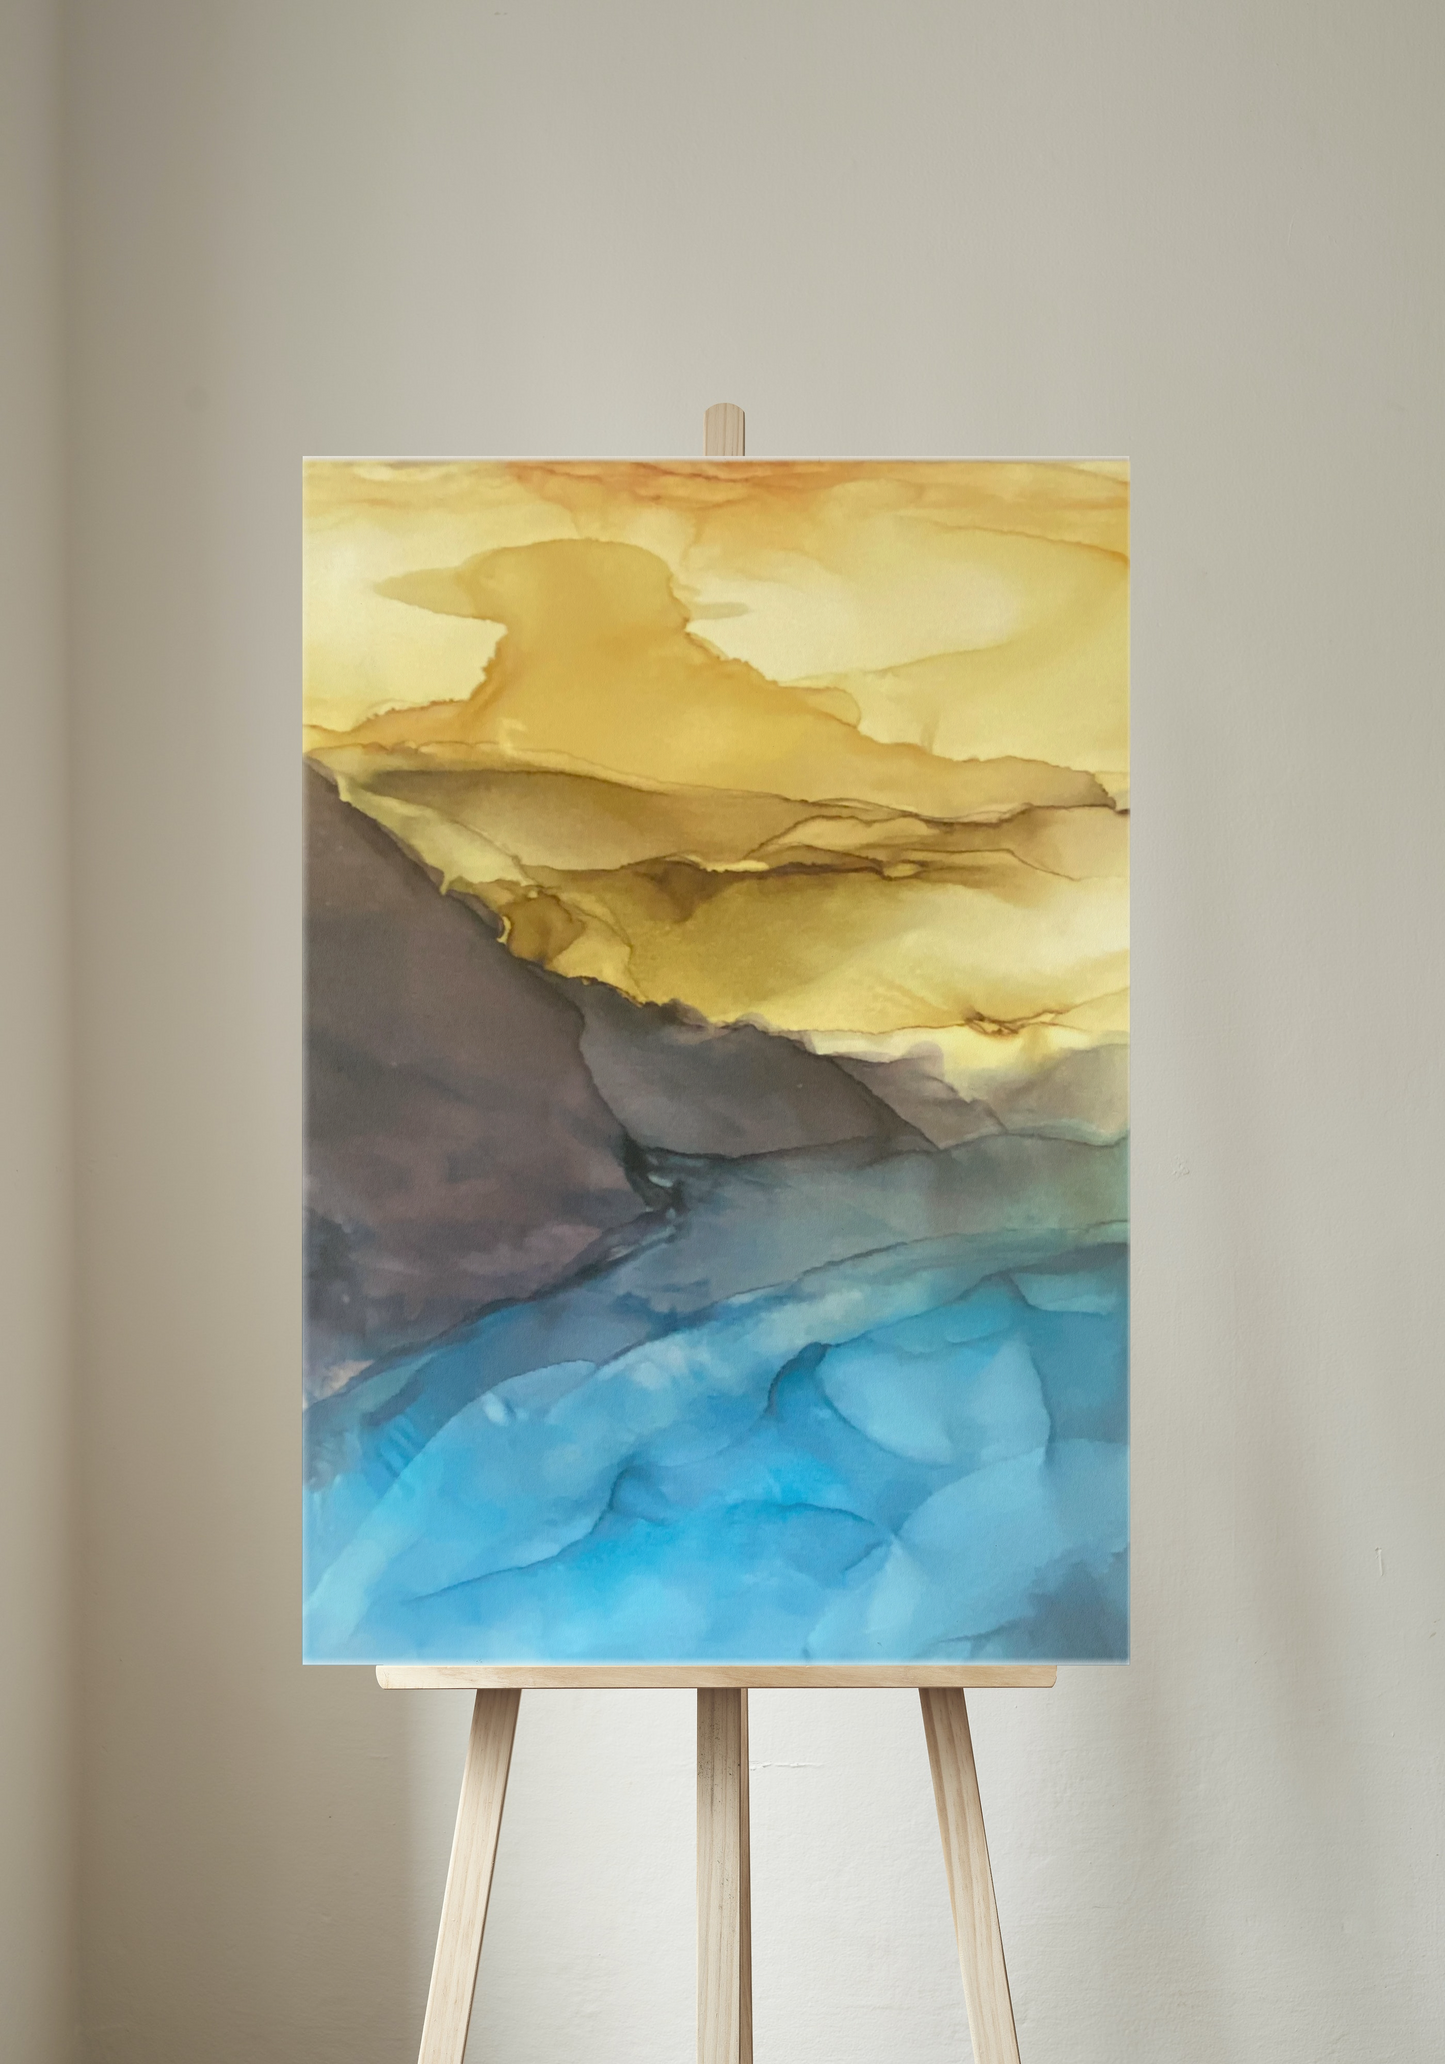 Coming Home - Yellow, Brown, and Blue Alcohol Ink Original on Canvas